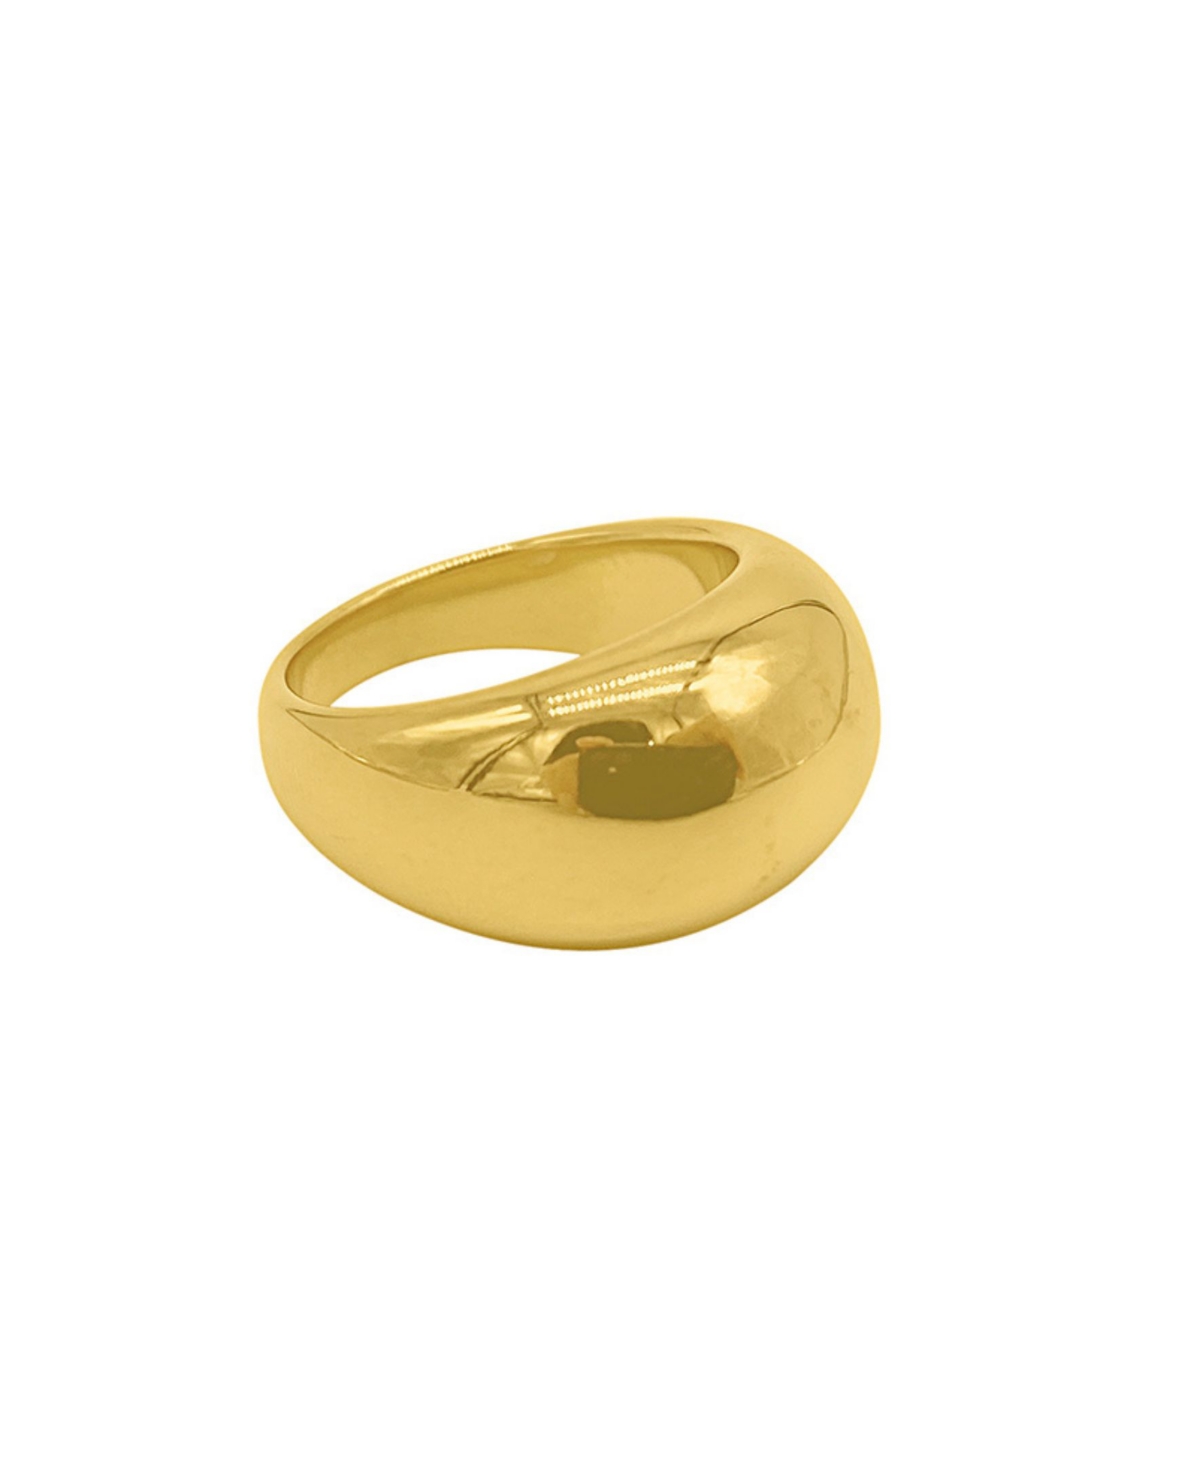 Adornia 14k Gold Plated Dome Ring